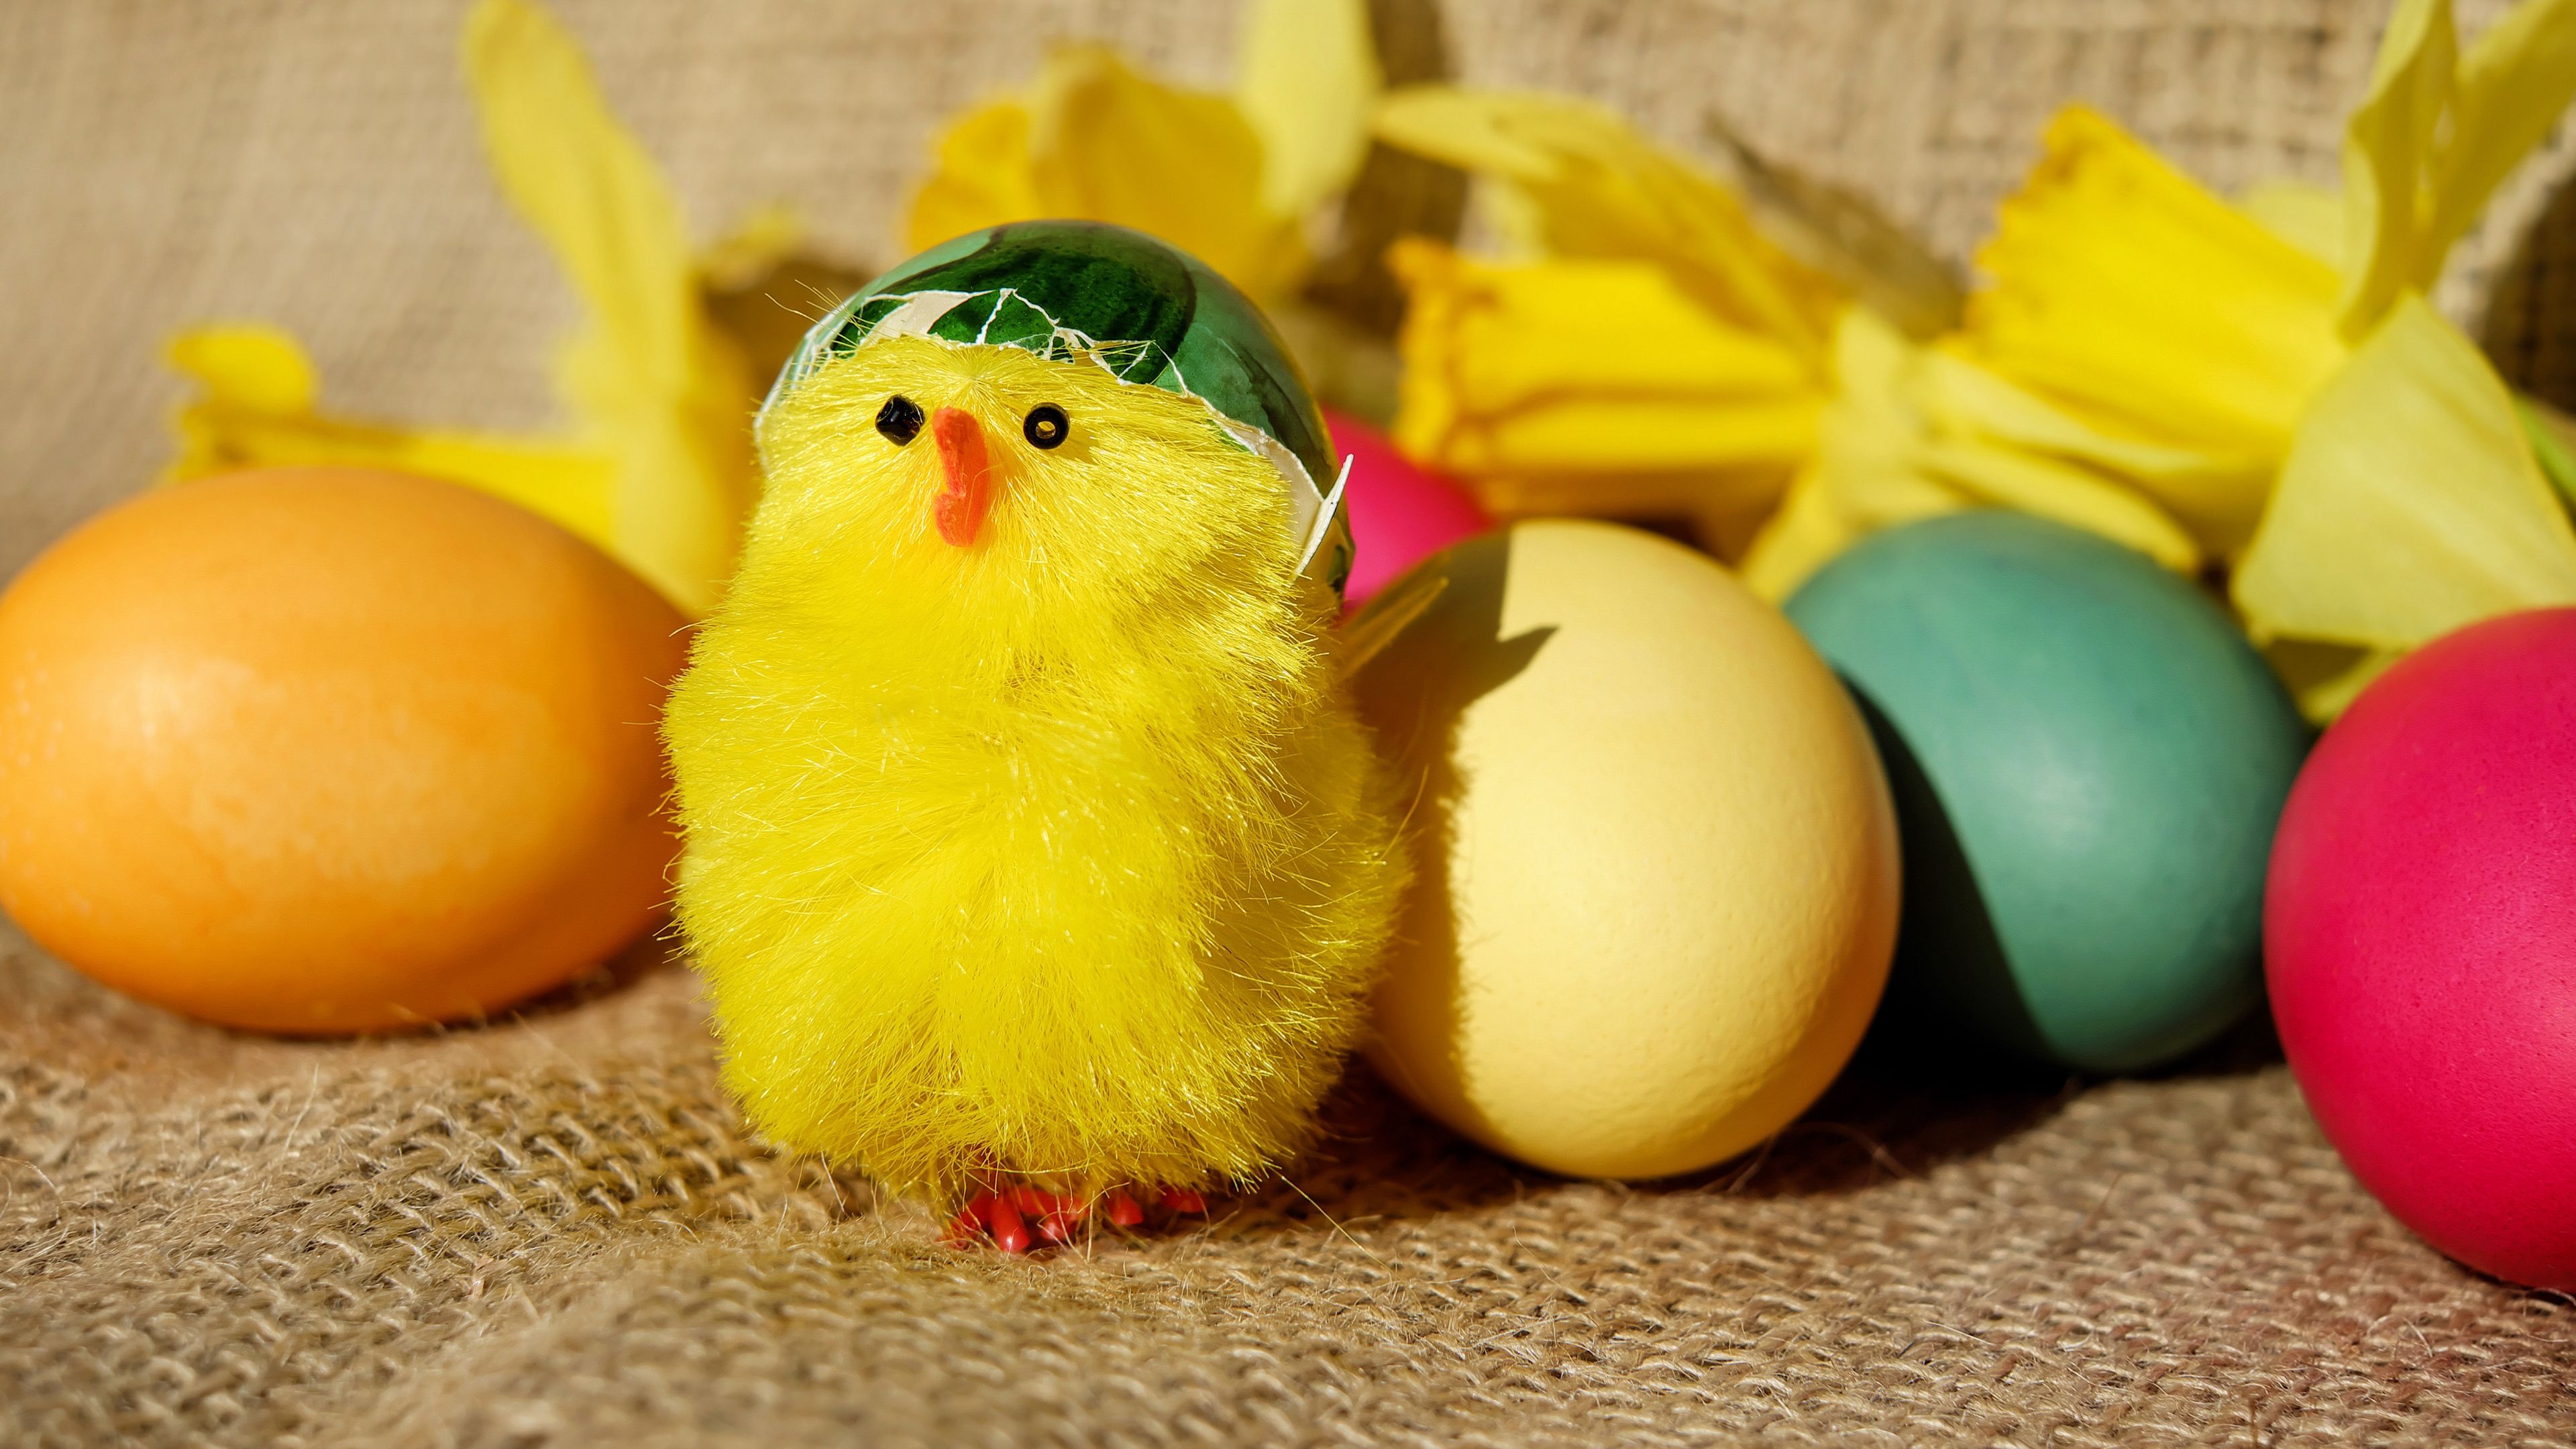 Download wallpaper 3840x2160 chick, eggs, easter 4k uhd 16:9 HD